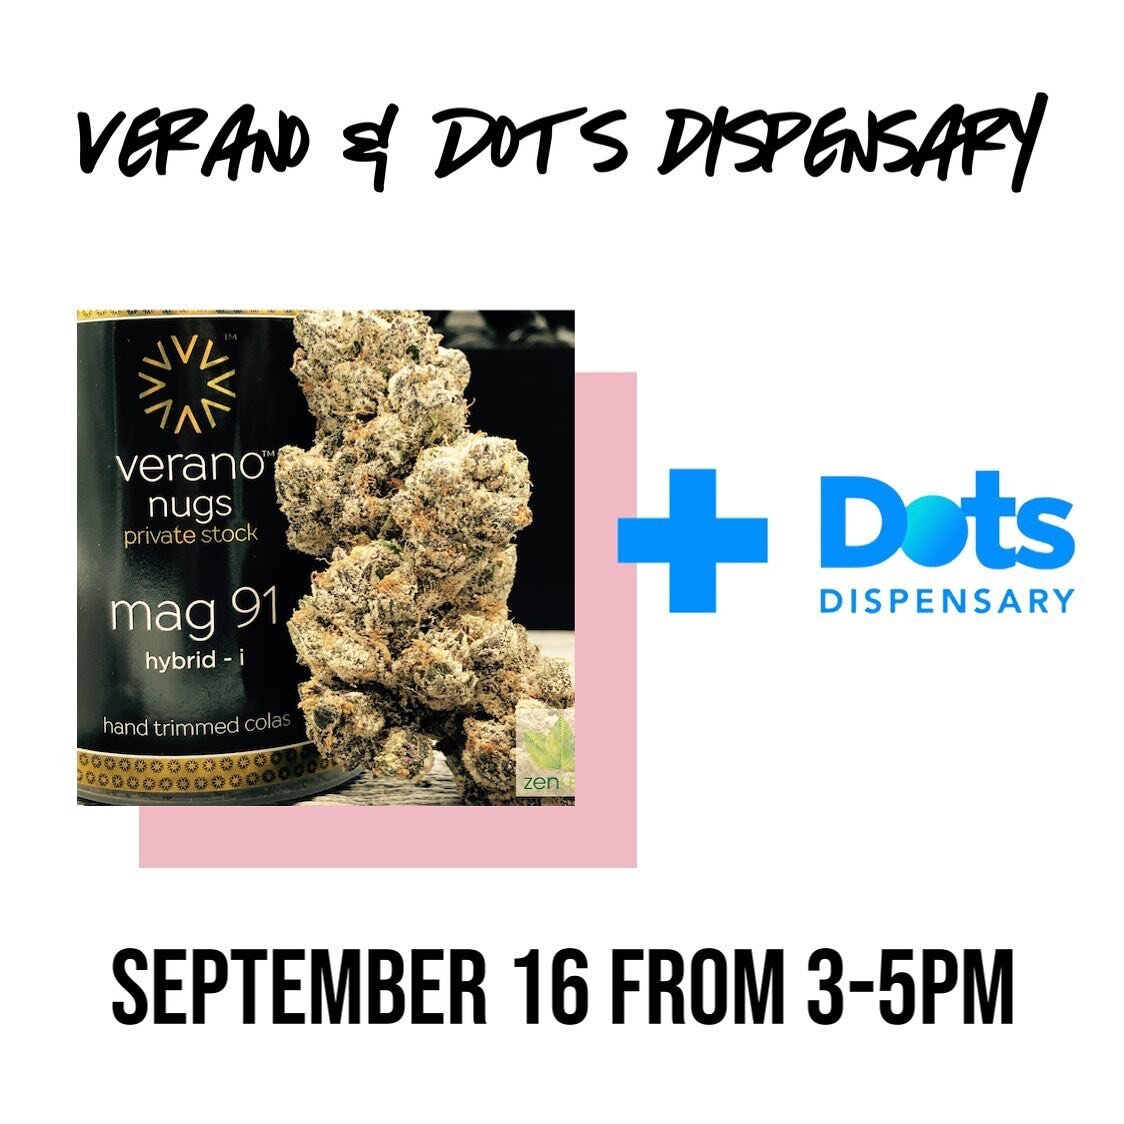 POPUP!
Come check out our good friends @veranobrands at the Dots Dispensary shop on September 16th from 3 - 5. See you there!
&bull;
805 𝙉 𝙃𝙊𝙒𝘼𝙍𝘿 𝙎𝙏
𝙎𝙏𝙊𝙍𝙀 𝙃𝙊𝙐𝙍𝙎: 
𝙈𝙊𝙉 - 𝙎𝘼𝙏  12-6 
&bull;
#dotsdispensary #marylandcannabis #mar